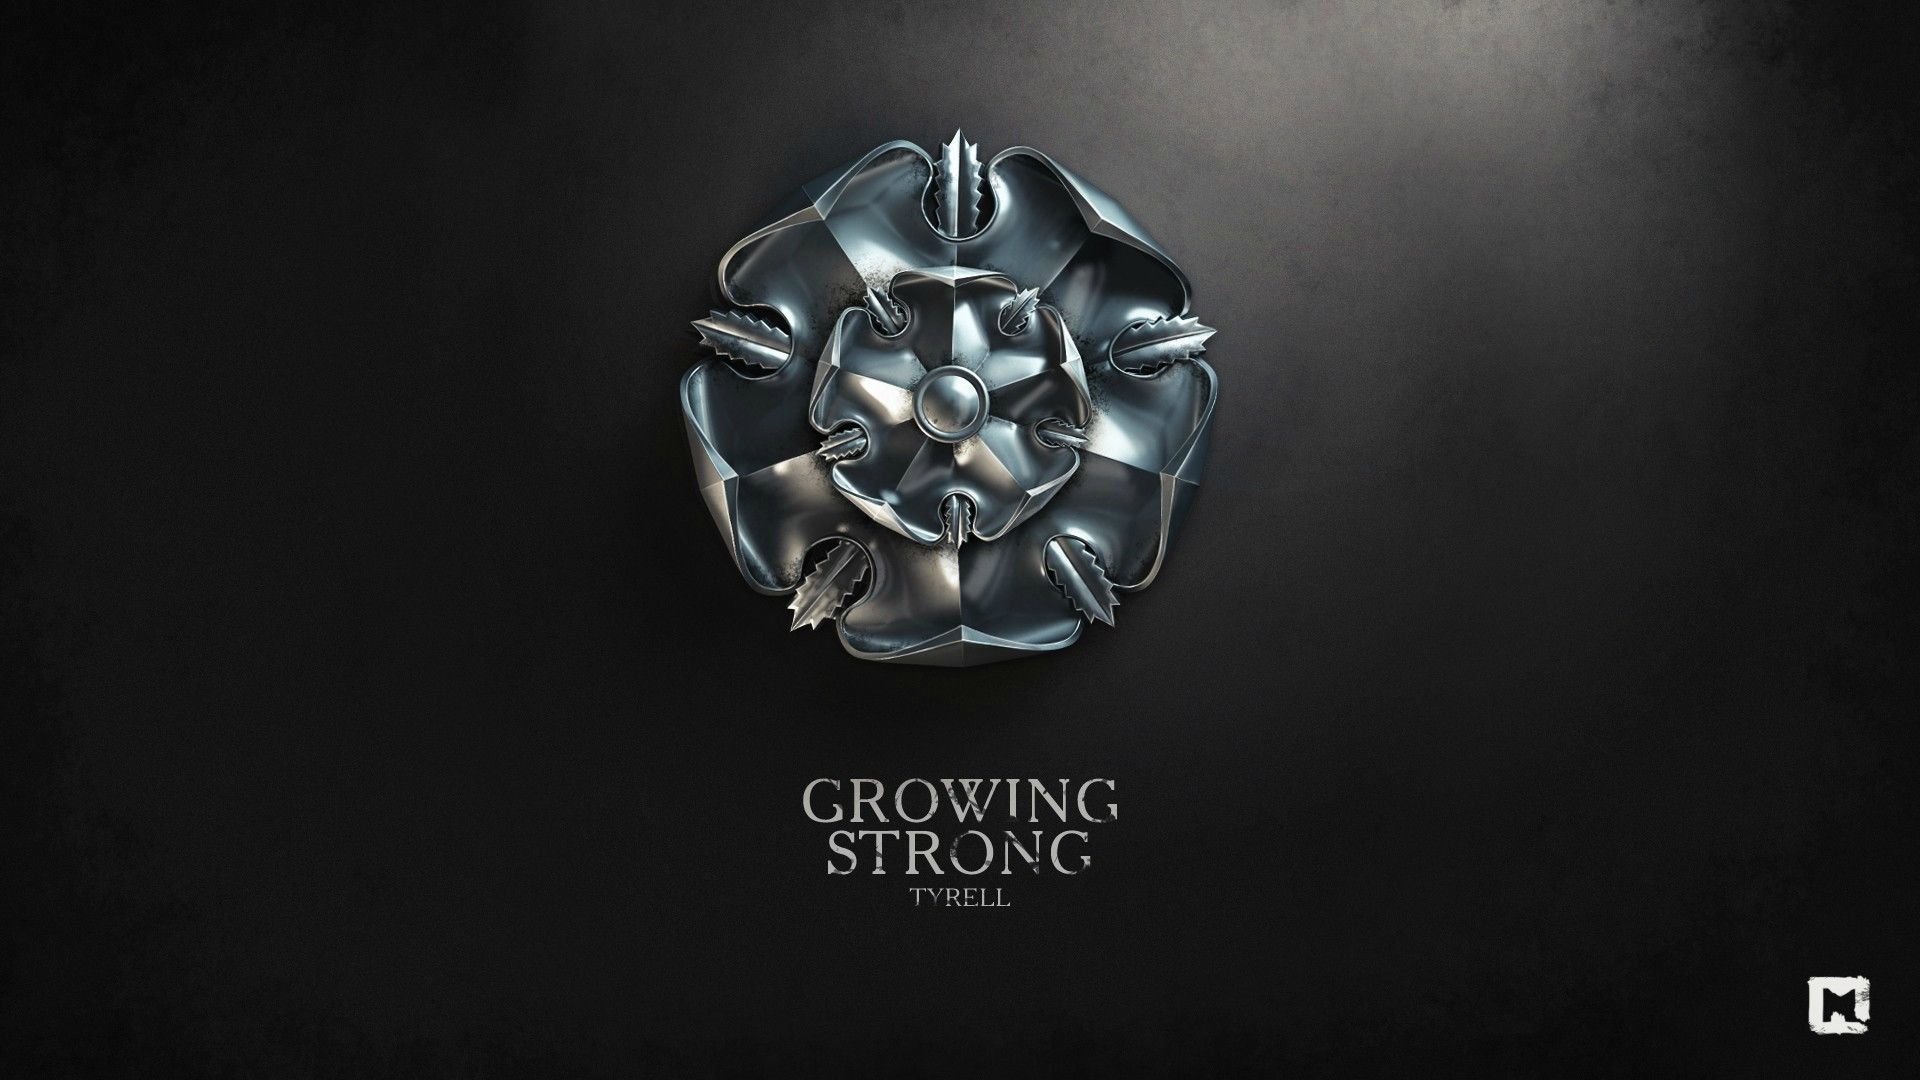 Game Of Thrones House Tyrell Sigil - HD Wallpaper 